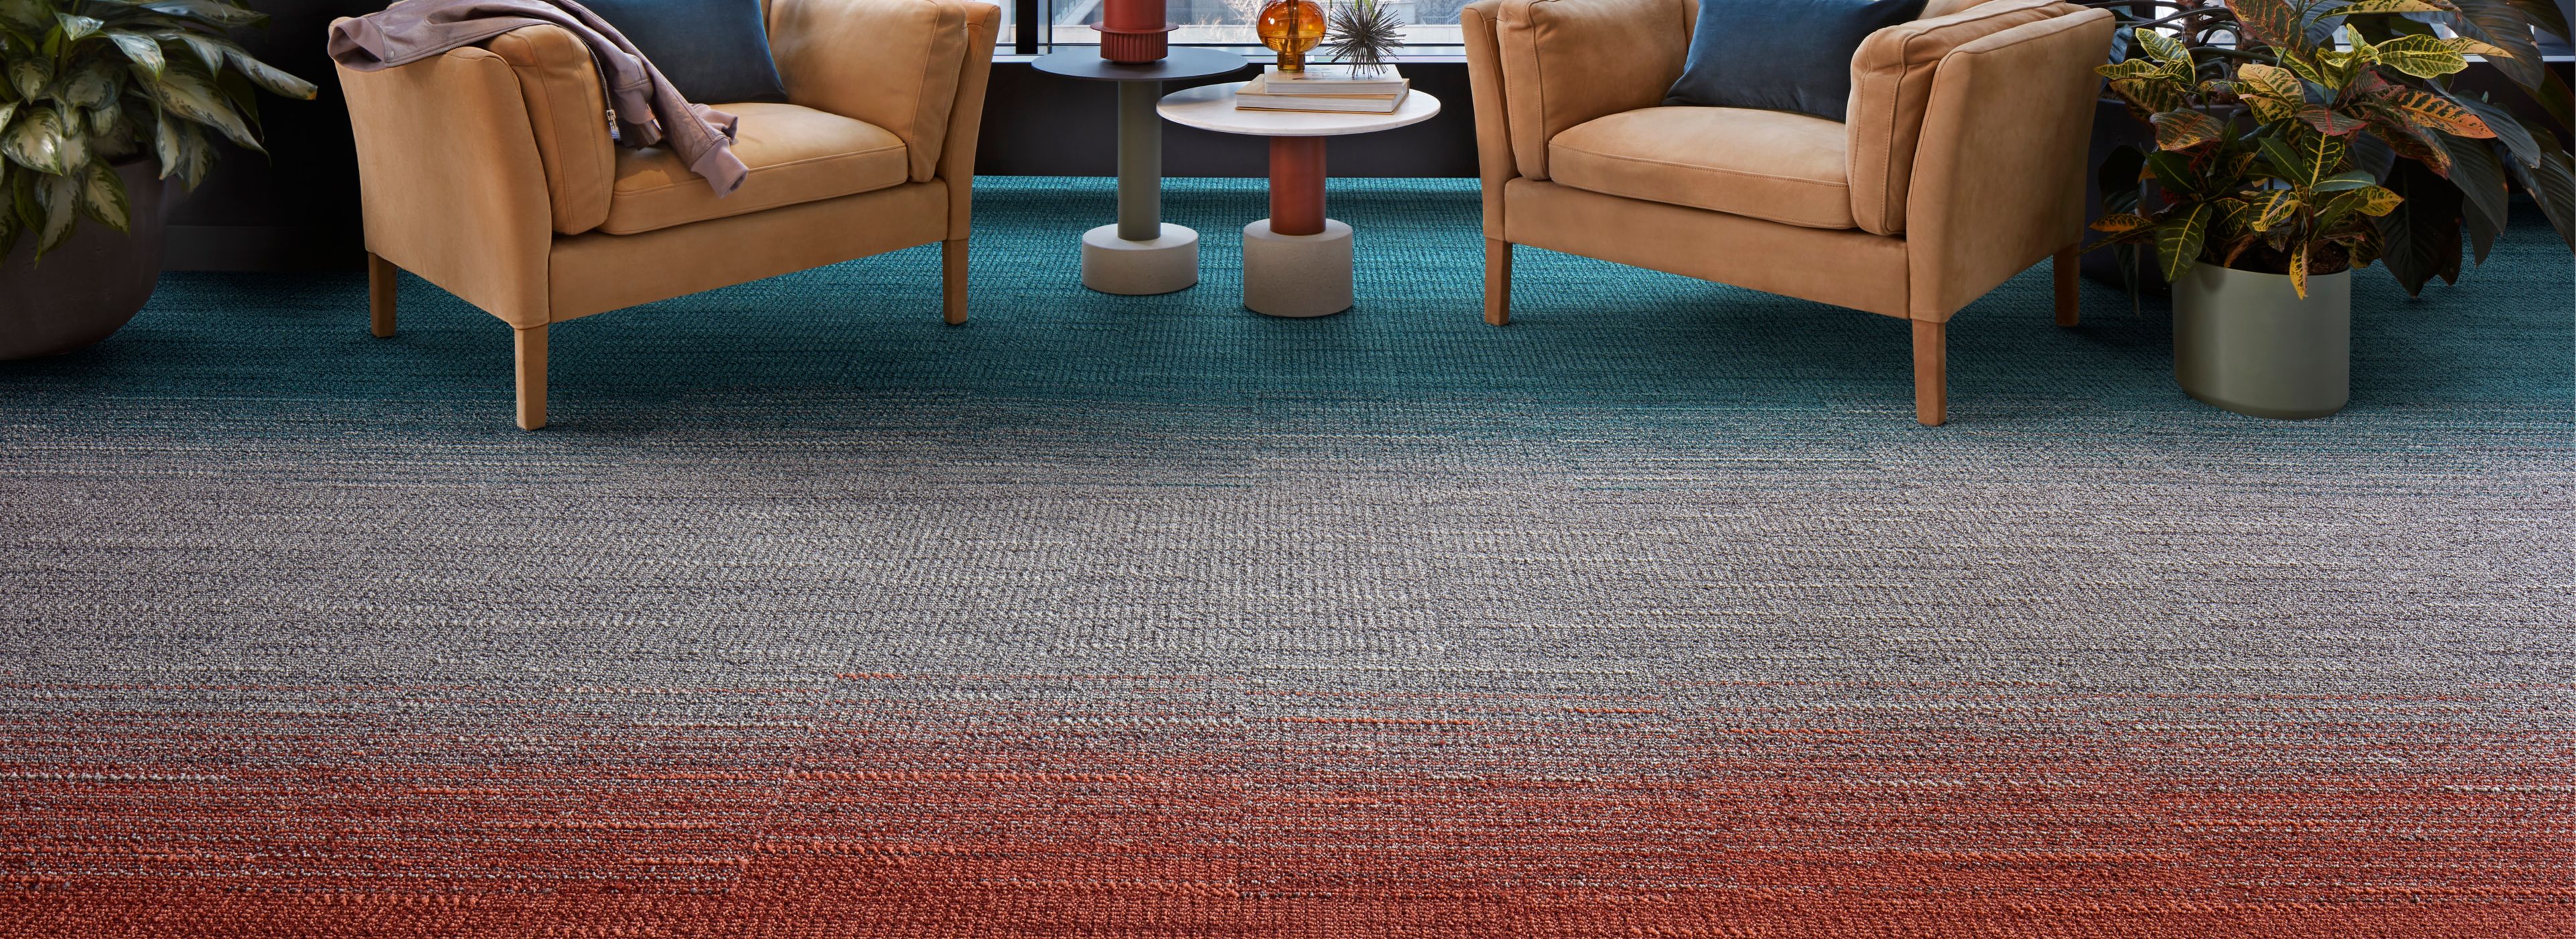 Interface WG100 and WG200 carpet tile in lobby imagen número 1